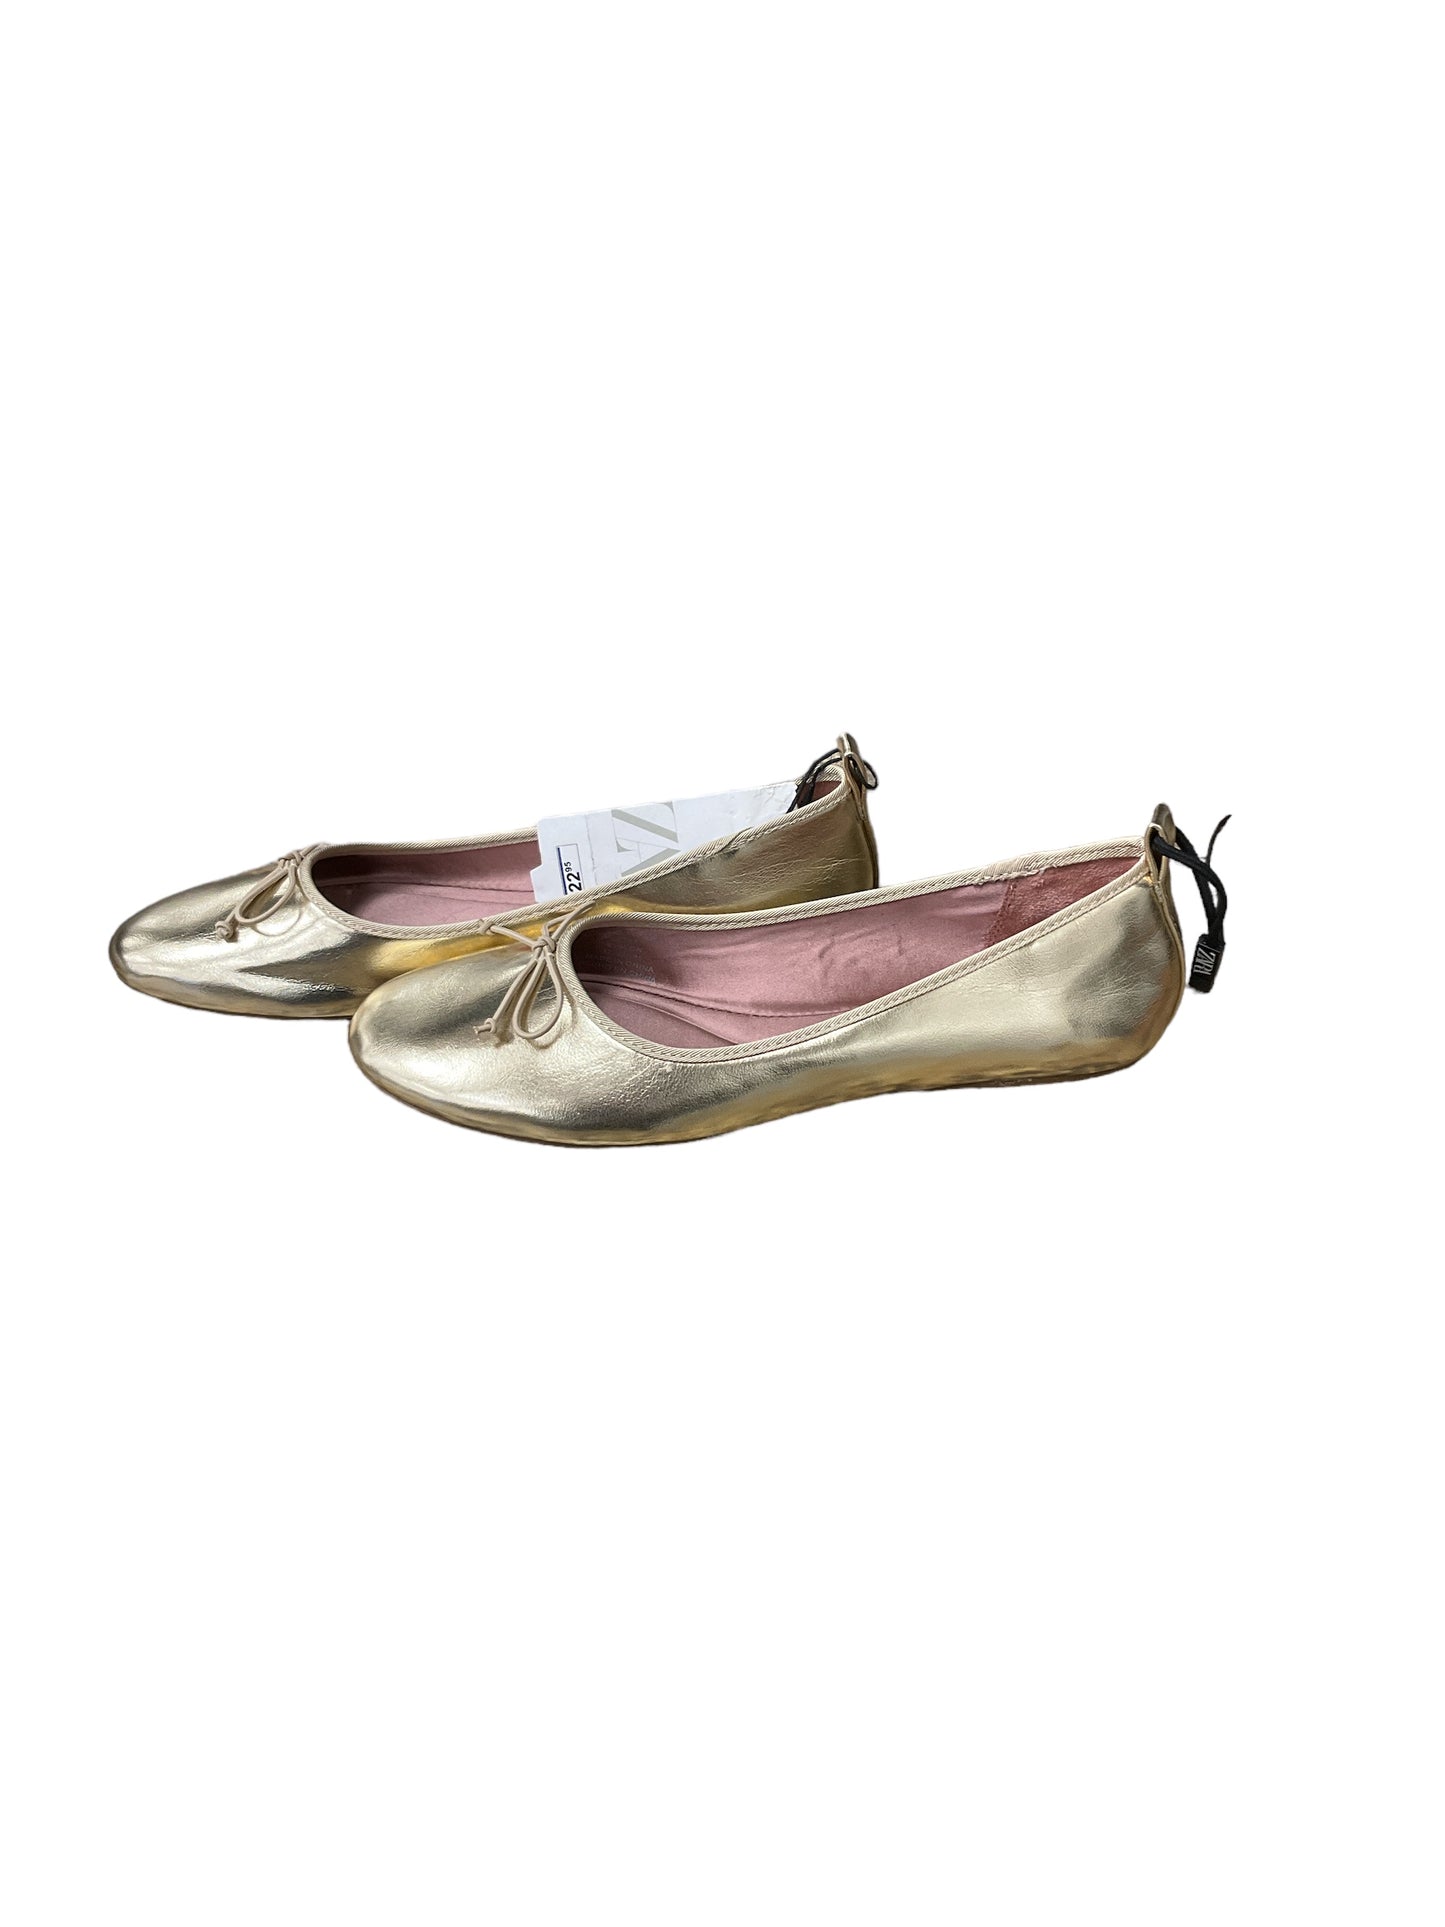 Shoes Flats Ballet By Zara  Size: 6.5